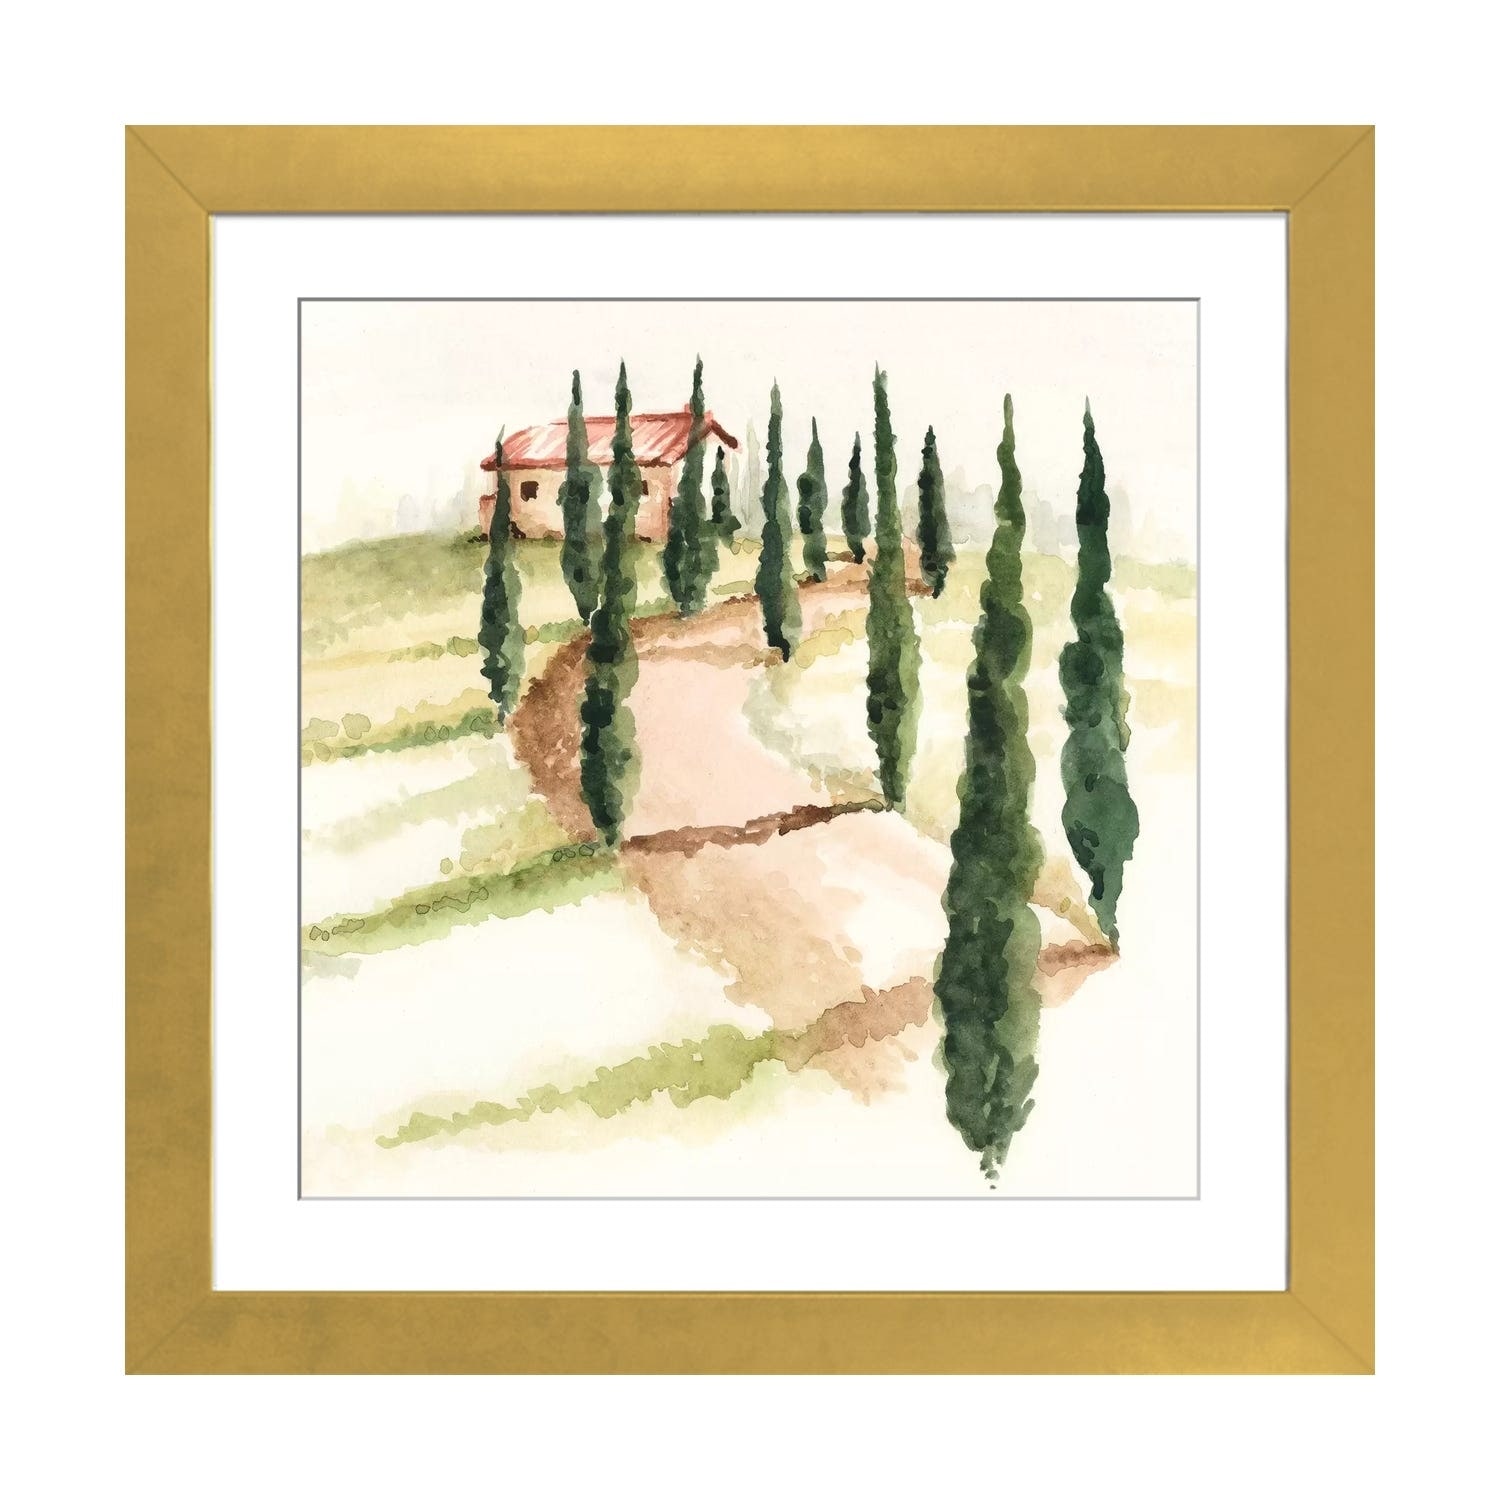 https://ak1.ostkcdn.com/images/products/is/images/direct/6a8bf832590db7fb23d5873086b5f56217fb0ced/iCanvas-%22Tuscan-Villa-III%22-by-Jennifer-Paxton-Parker.jpg